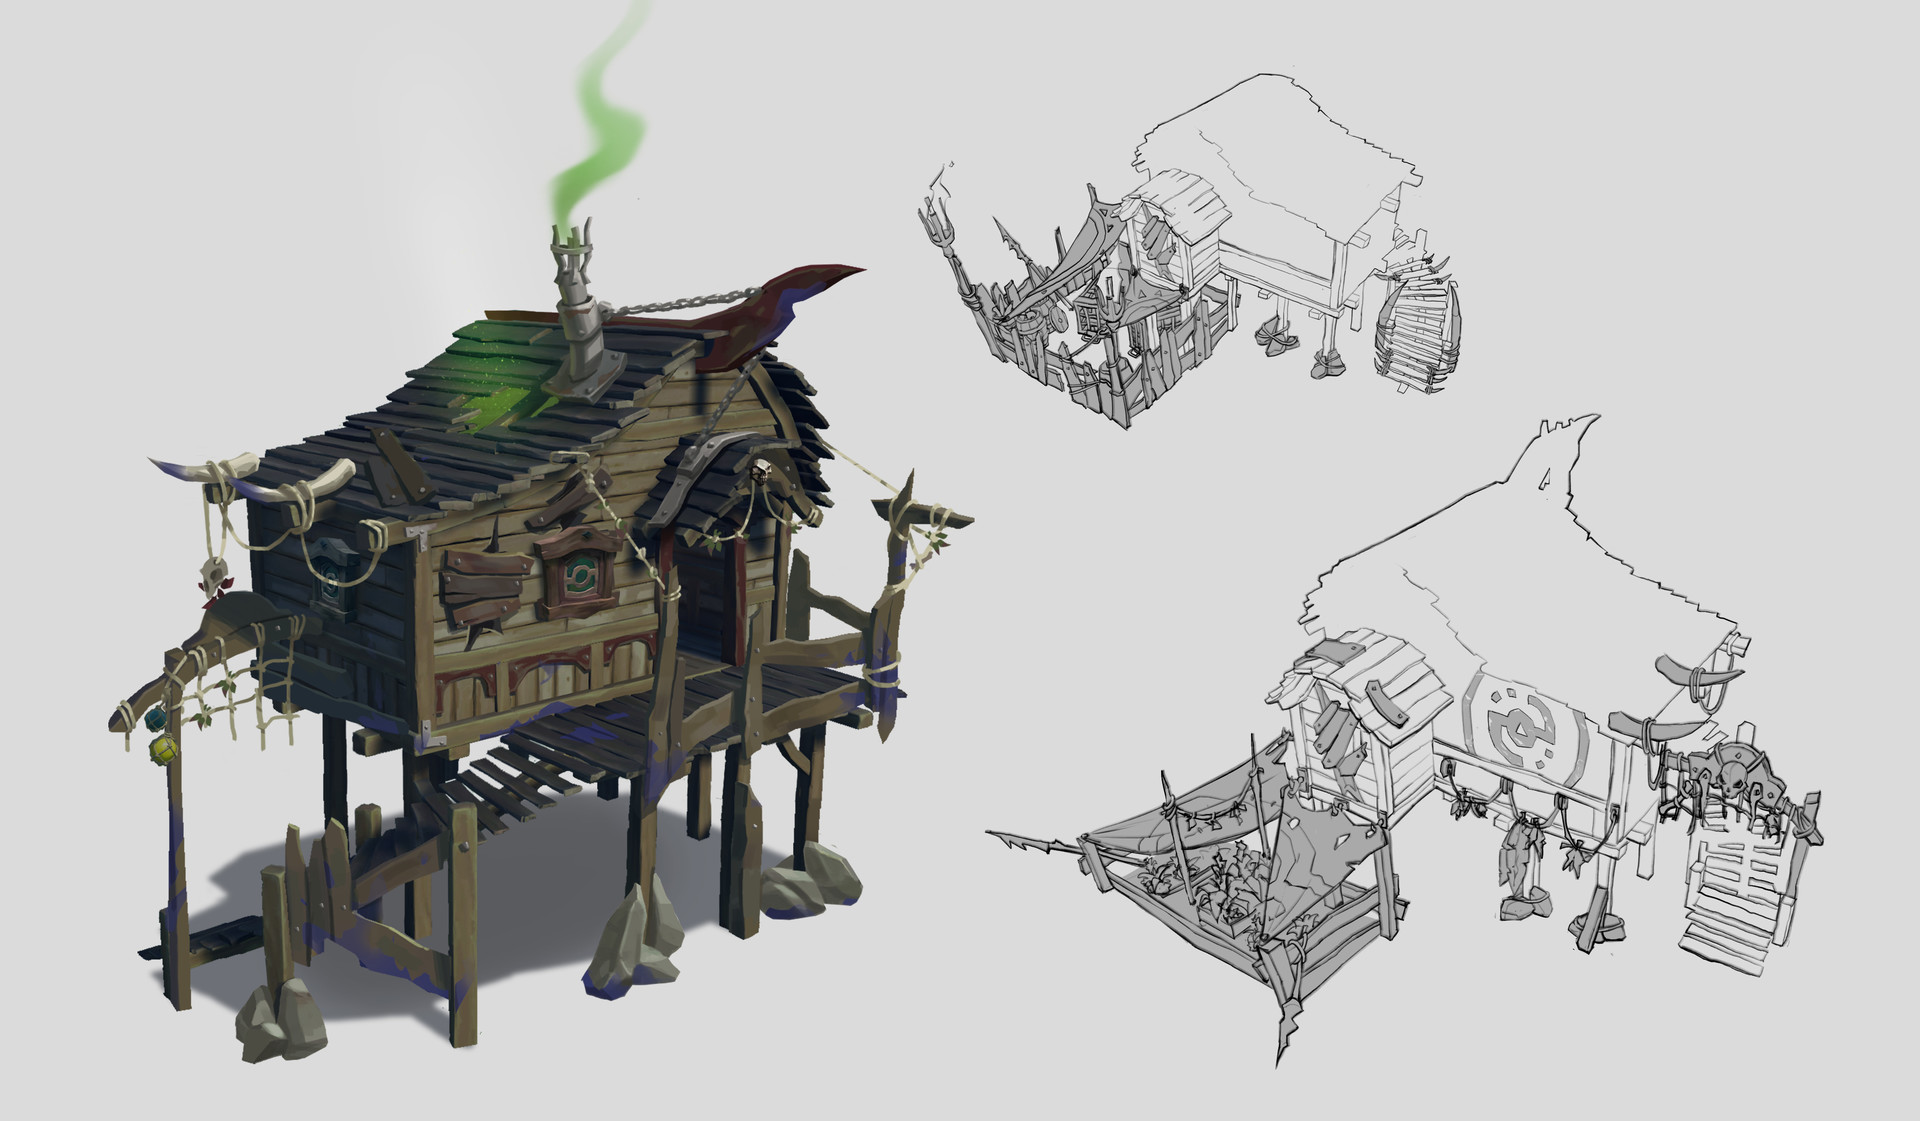 Sea of Thieves - Architecture and props design.